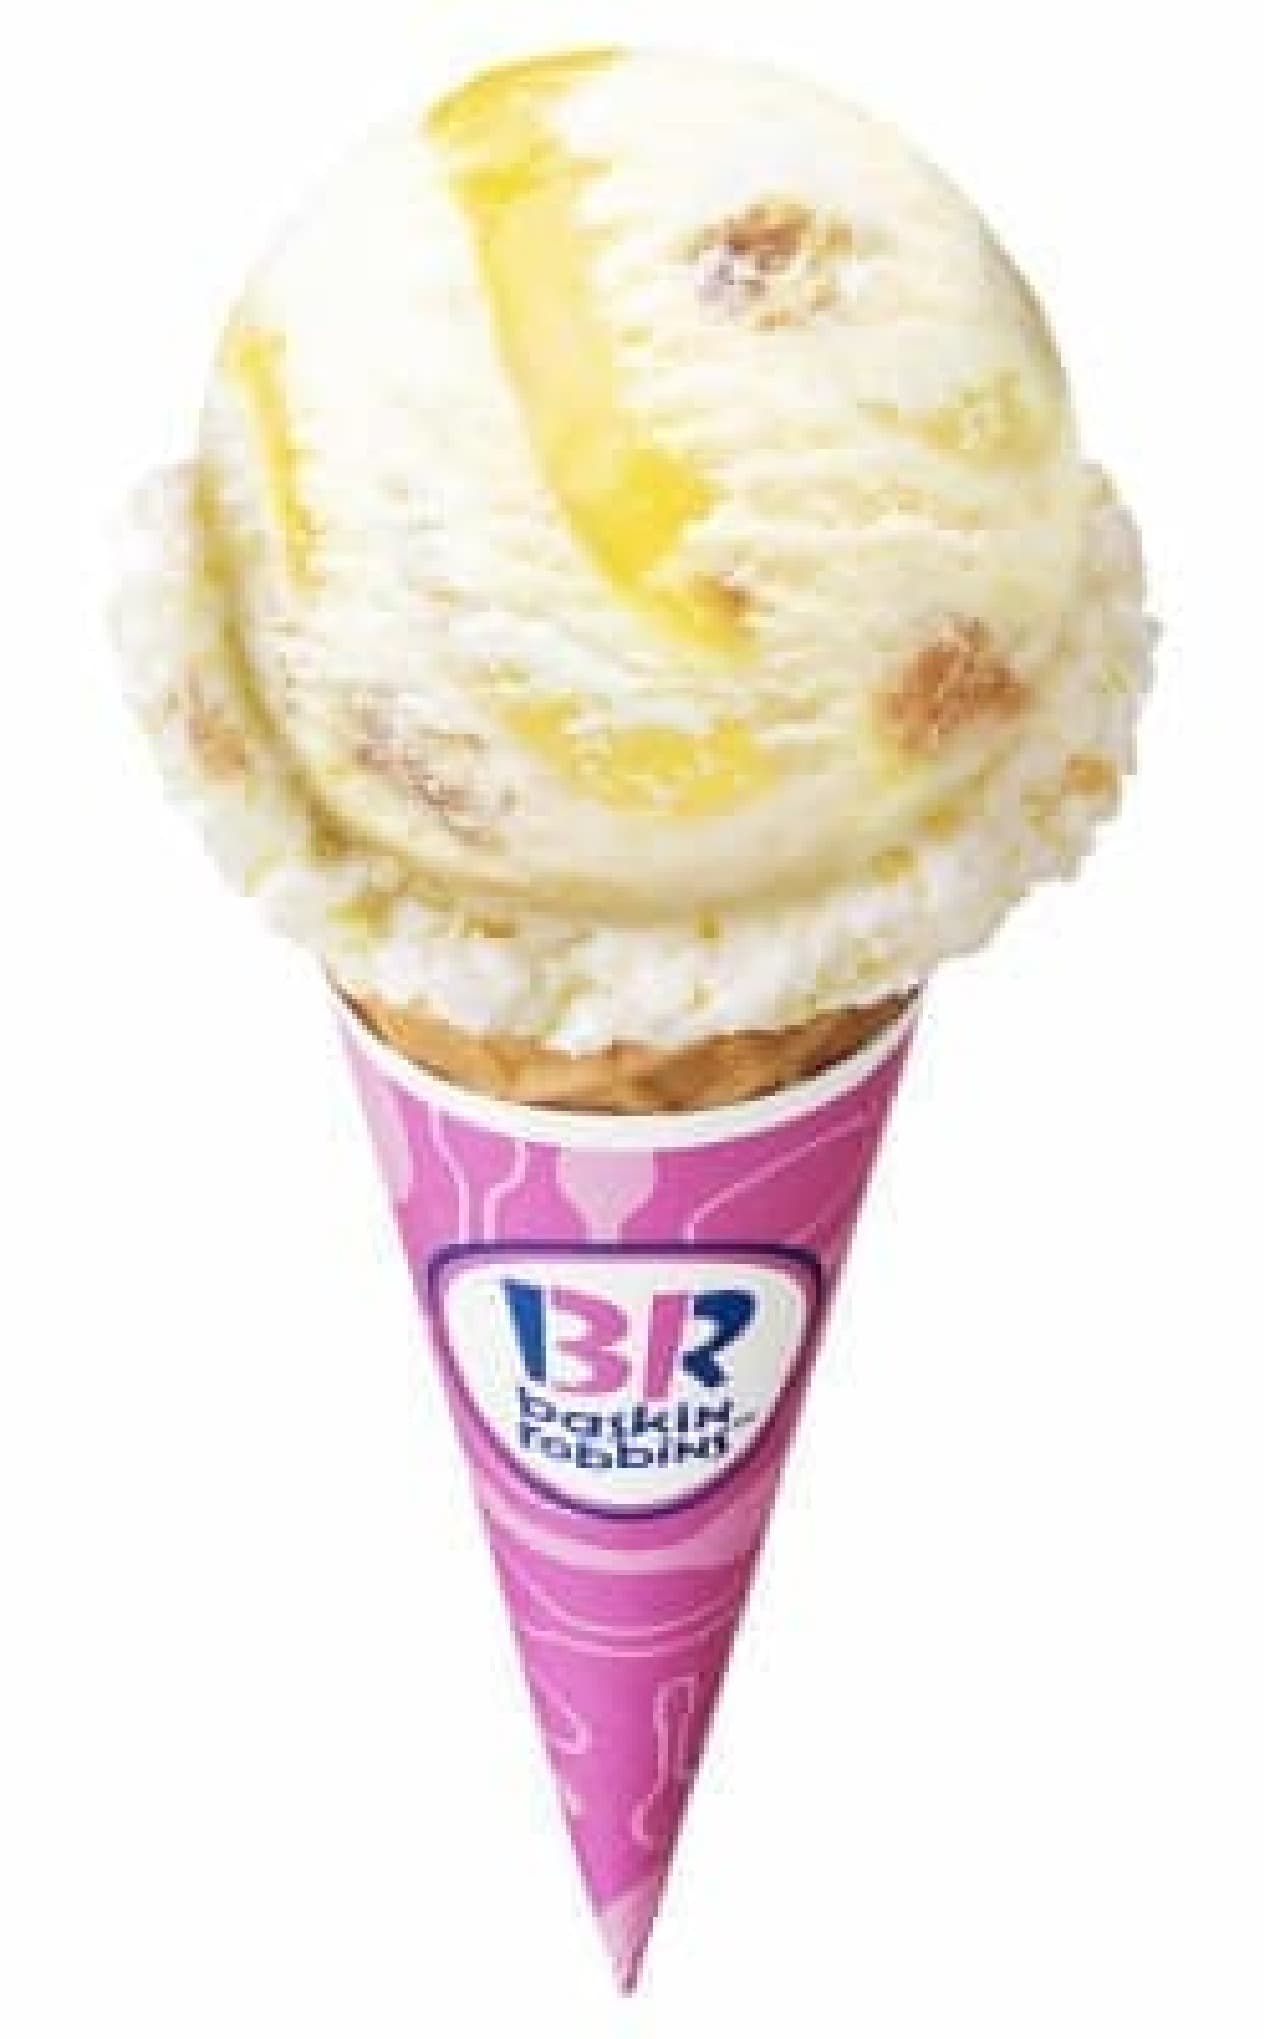 Introducing a new flavor of pineapple and cheesecake!